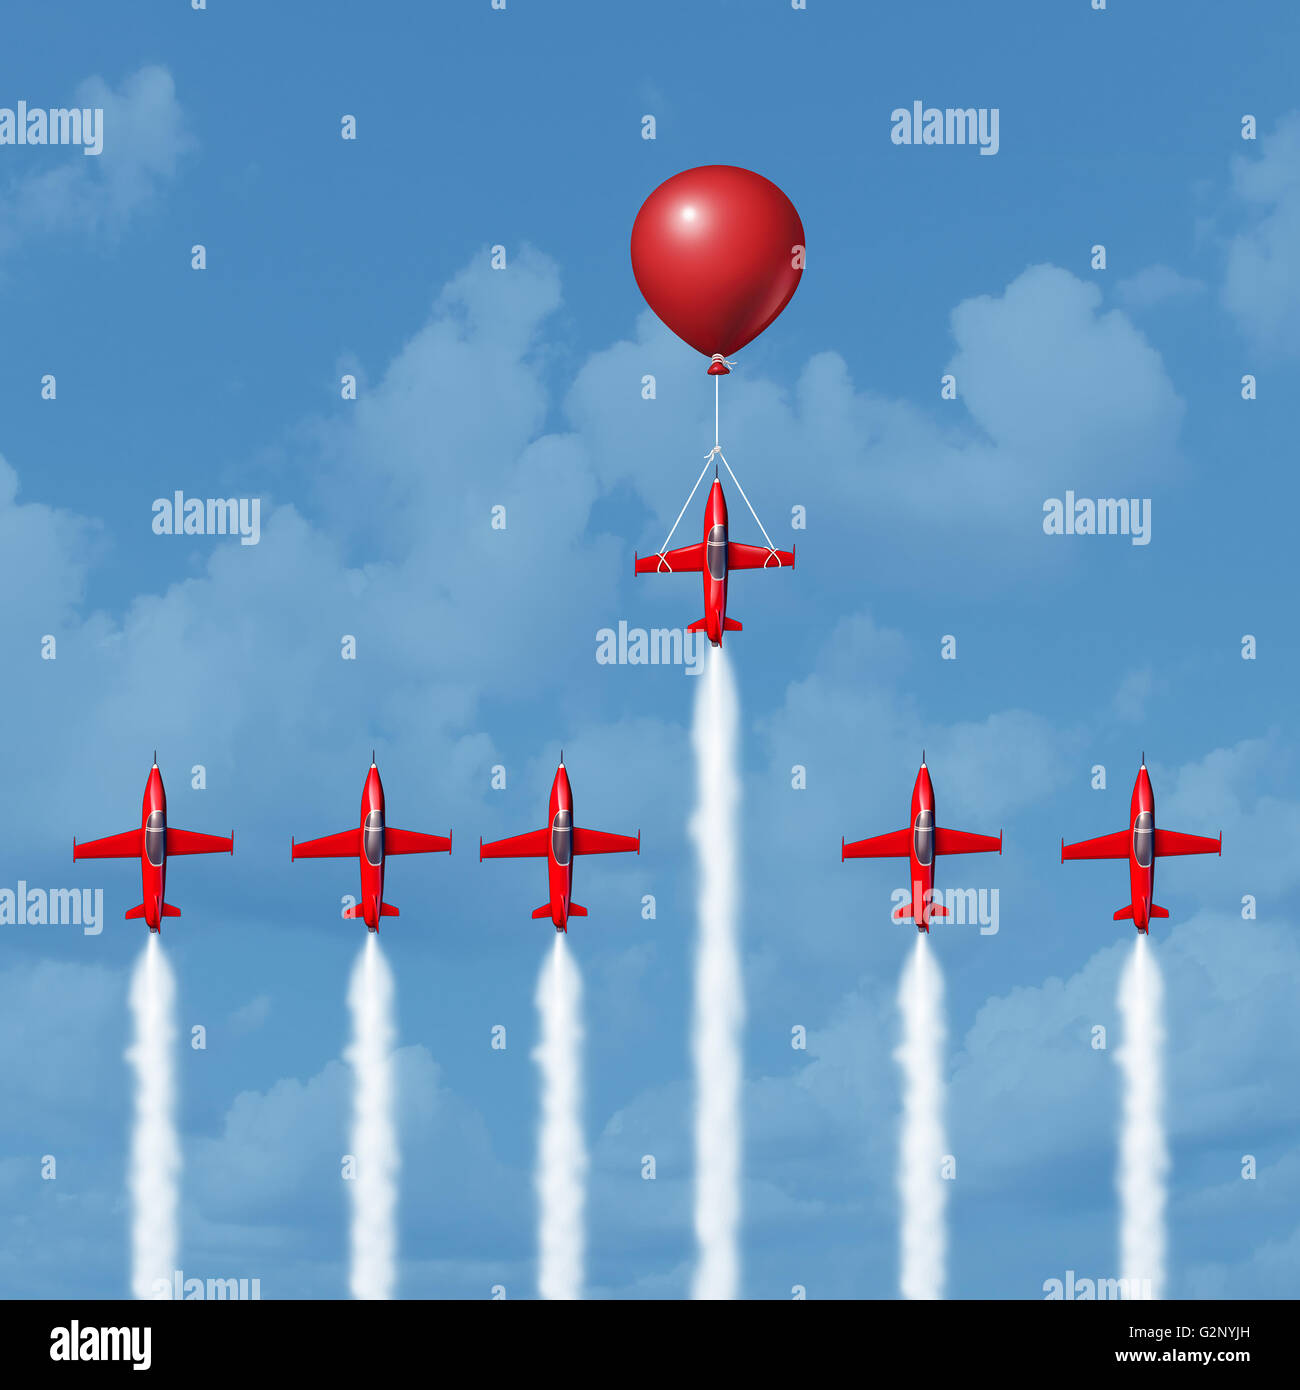 Winning business tools and successful strategy concept as a group of competitive jet airplanes racing up with one individual that is helped by a balloon as the winner as a 3D illustration. Stock Photo